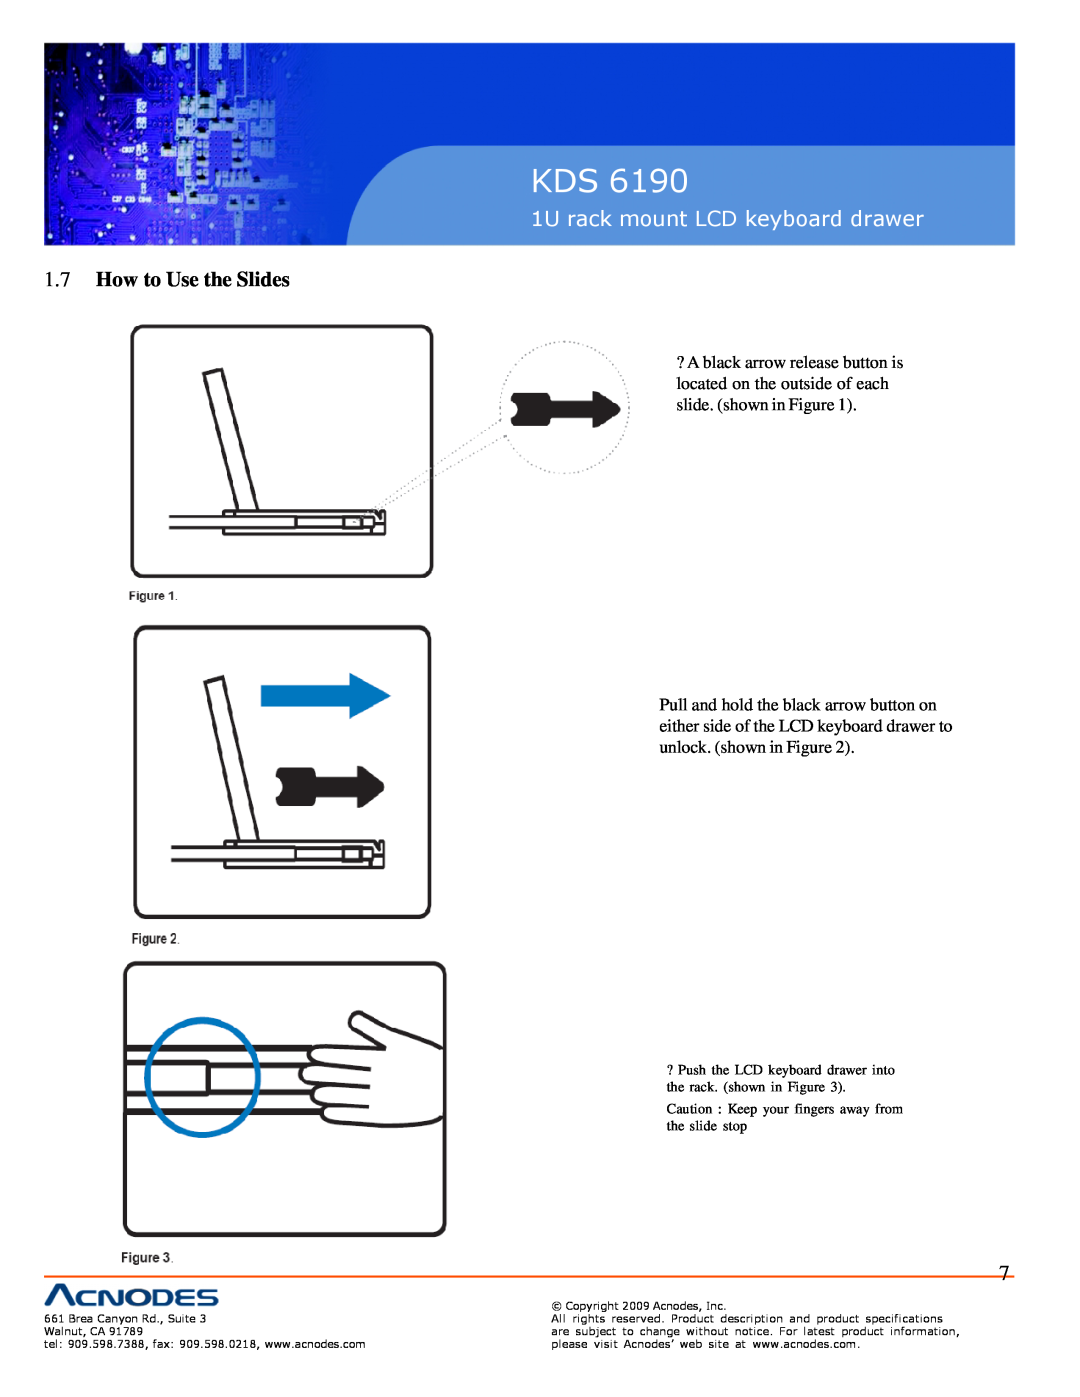 Acnodes KDS 6190 specifications How to Use the Slides, 1U rack mount LCD keyboard drawer 